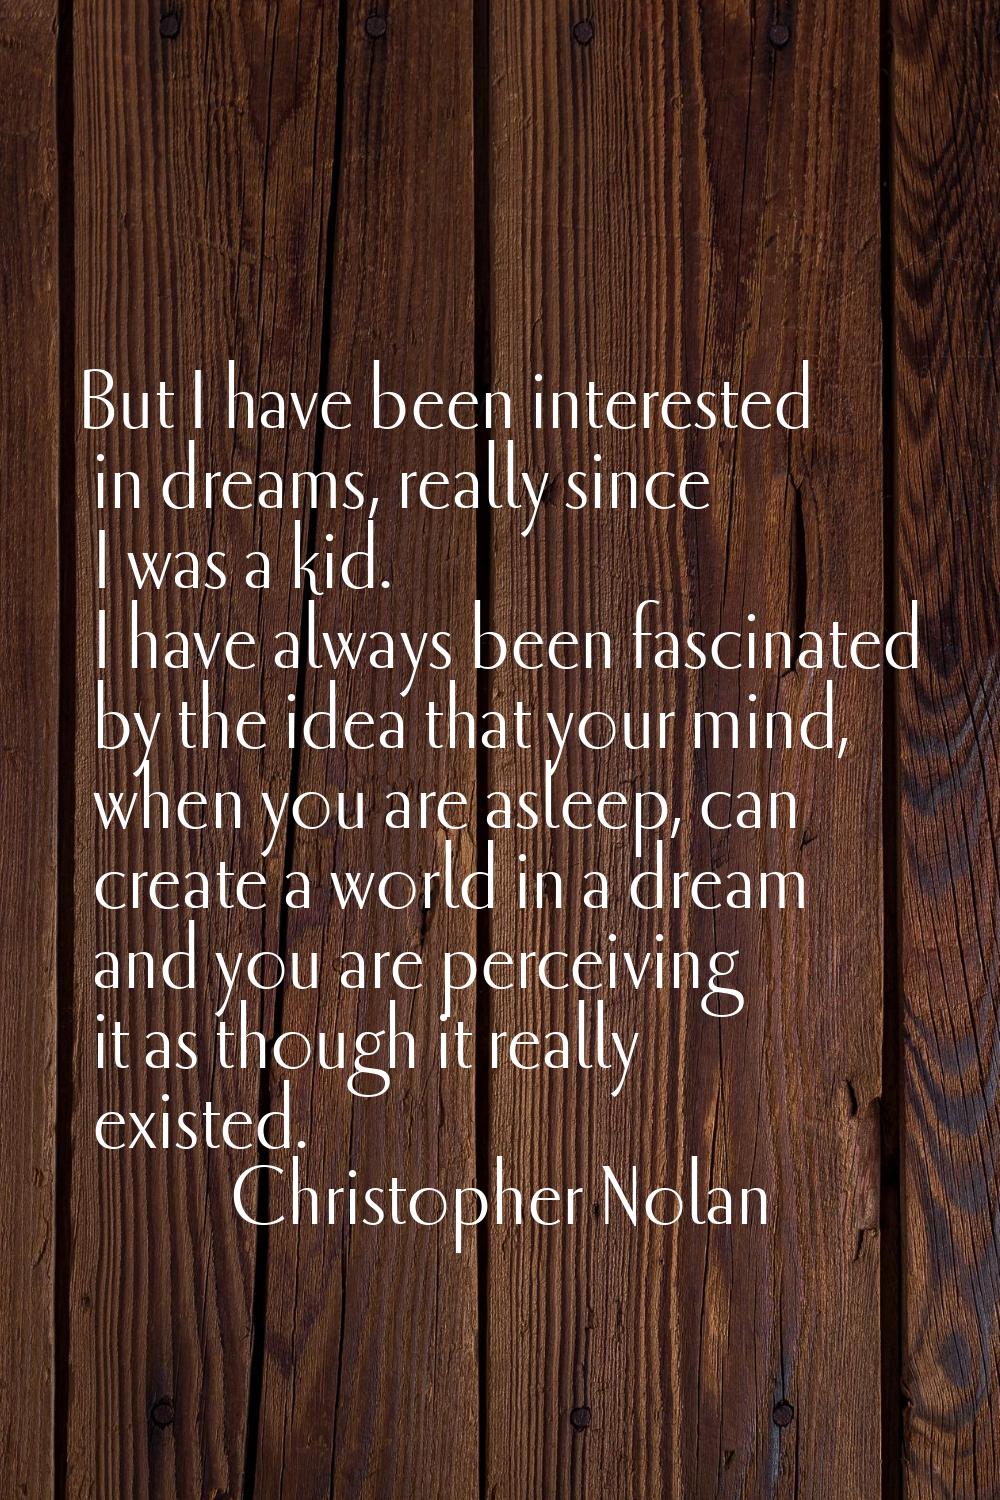 But I have been interested in dreams, really since I was a kid. I have always been fascinated by th